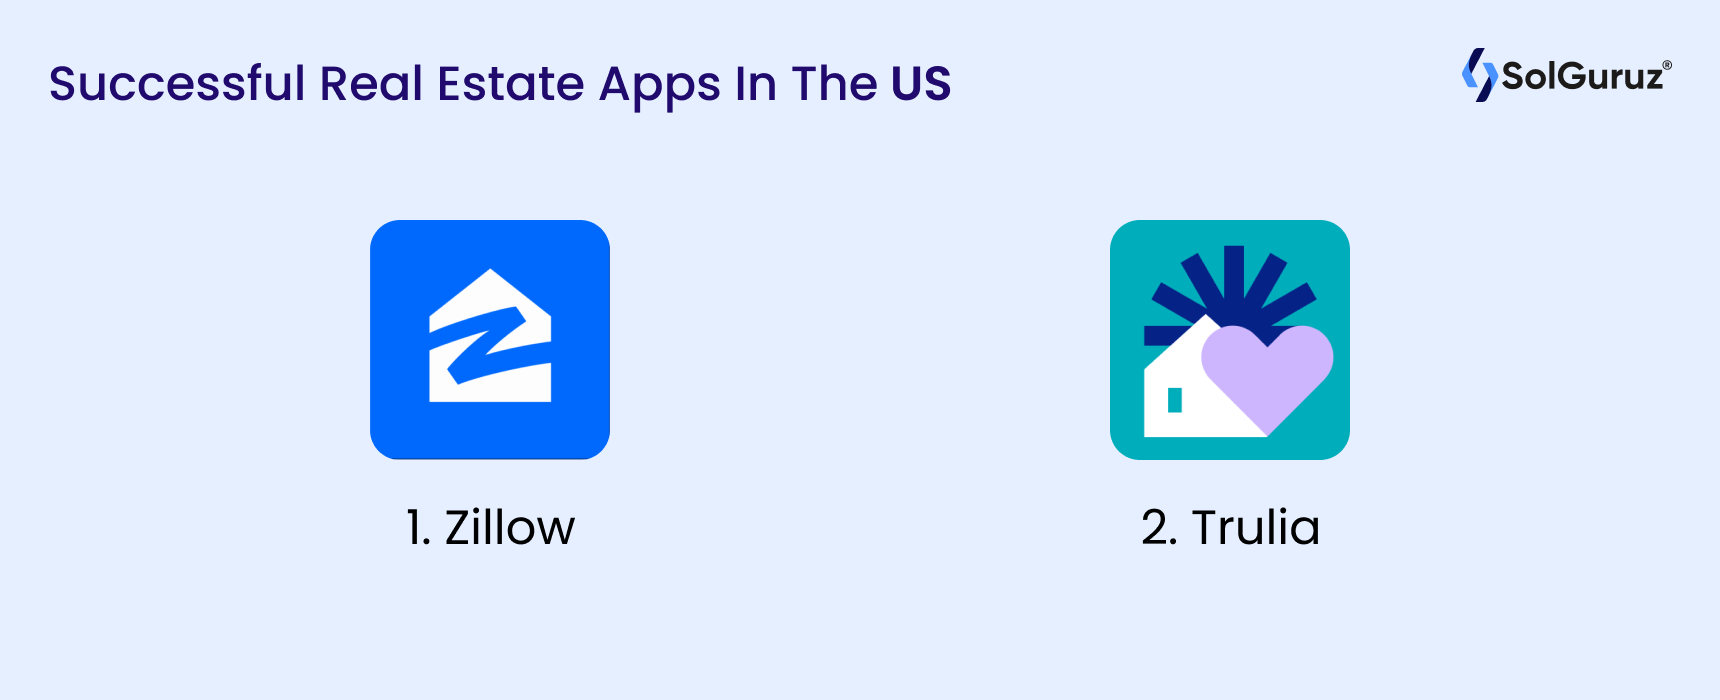 Successful real estate apps in the US